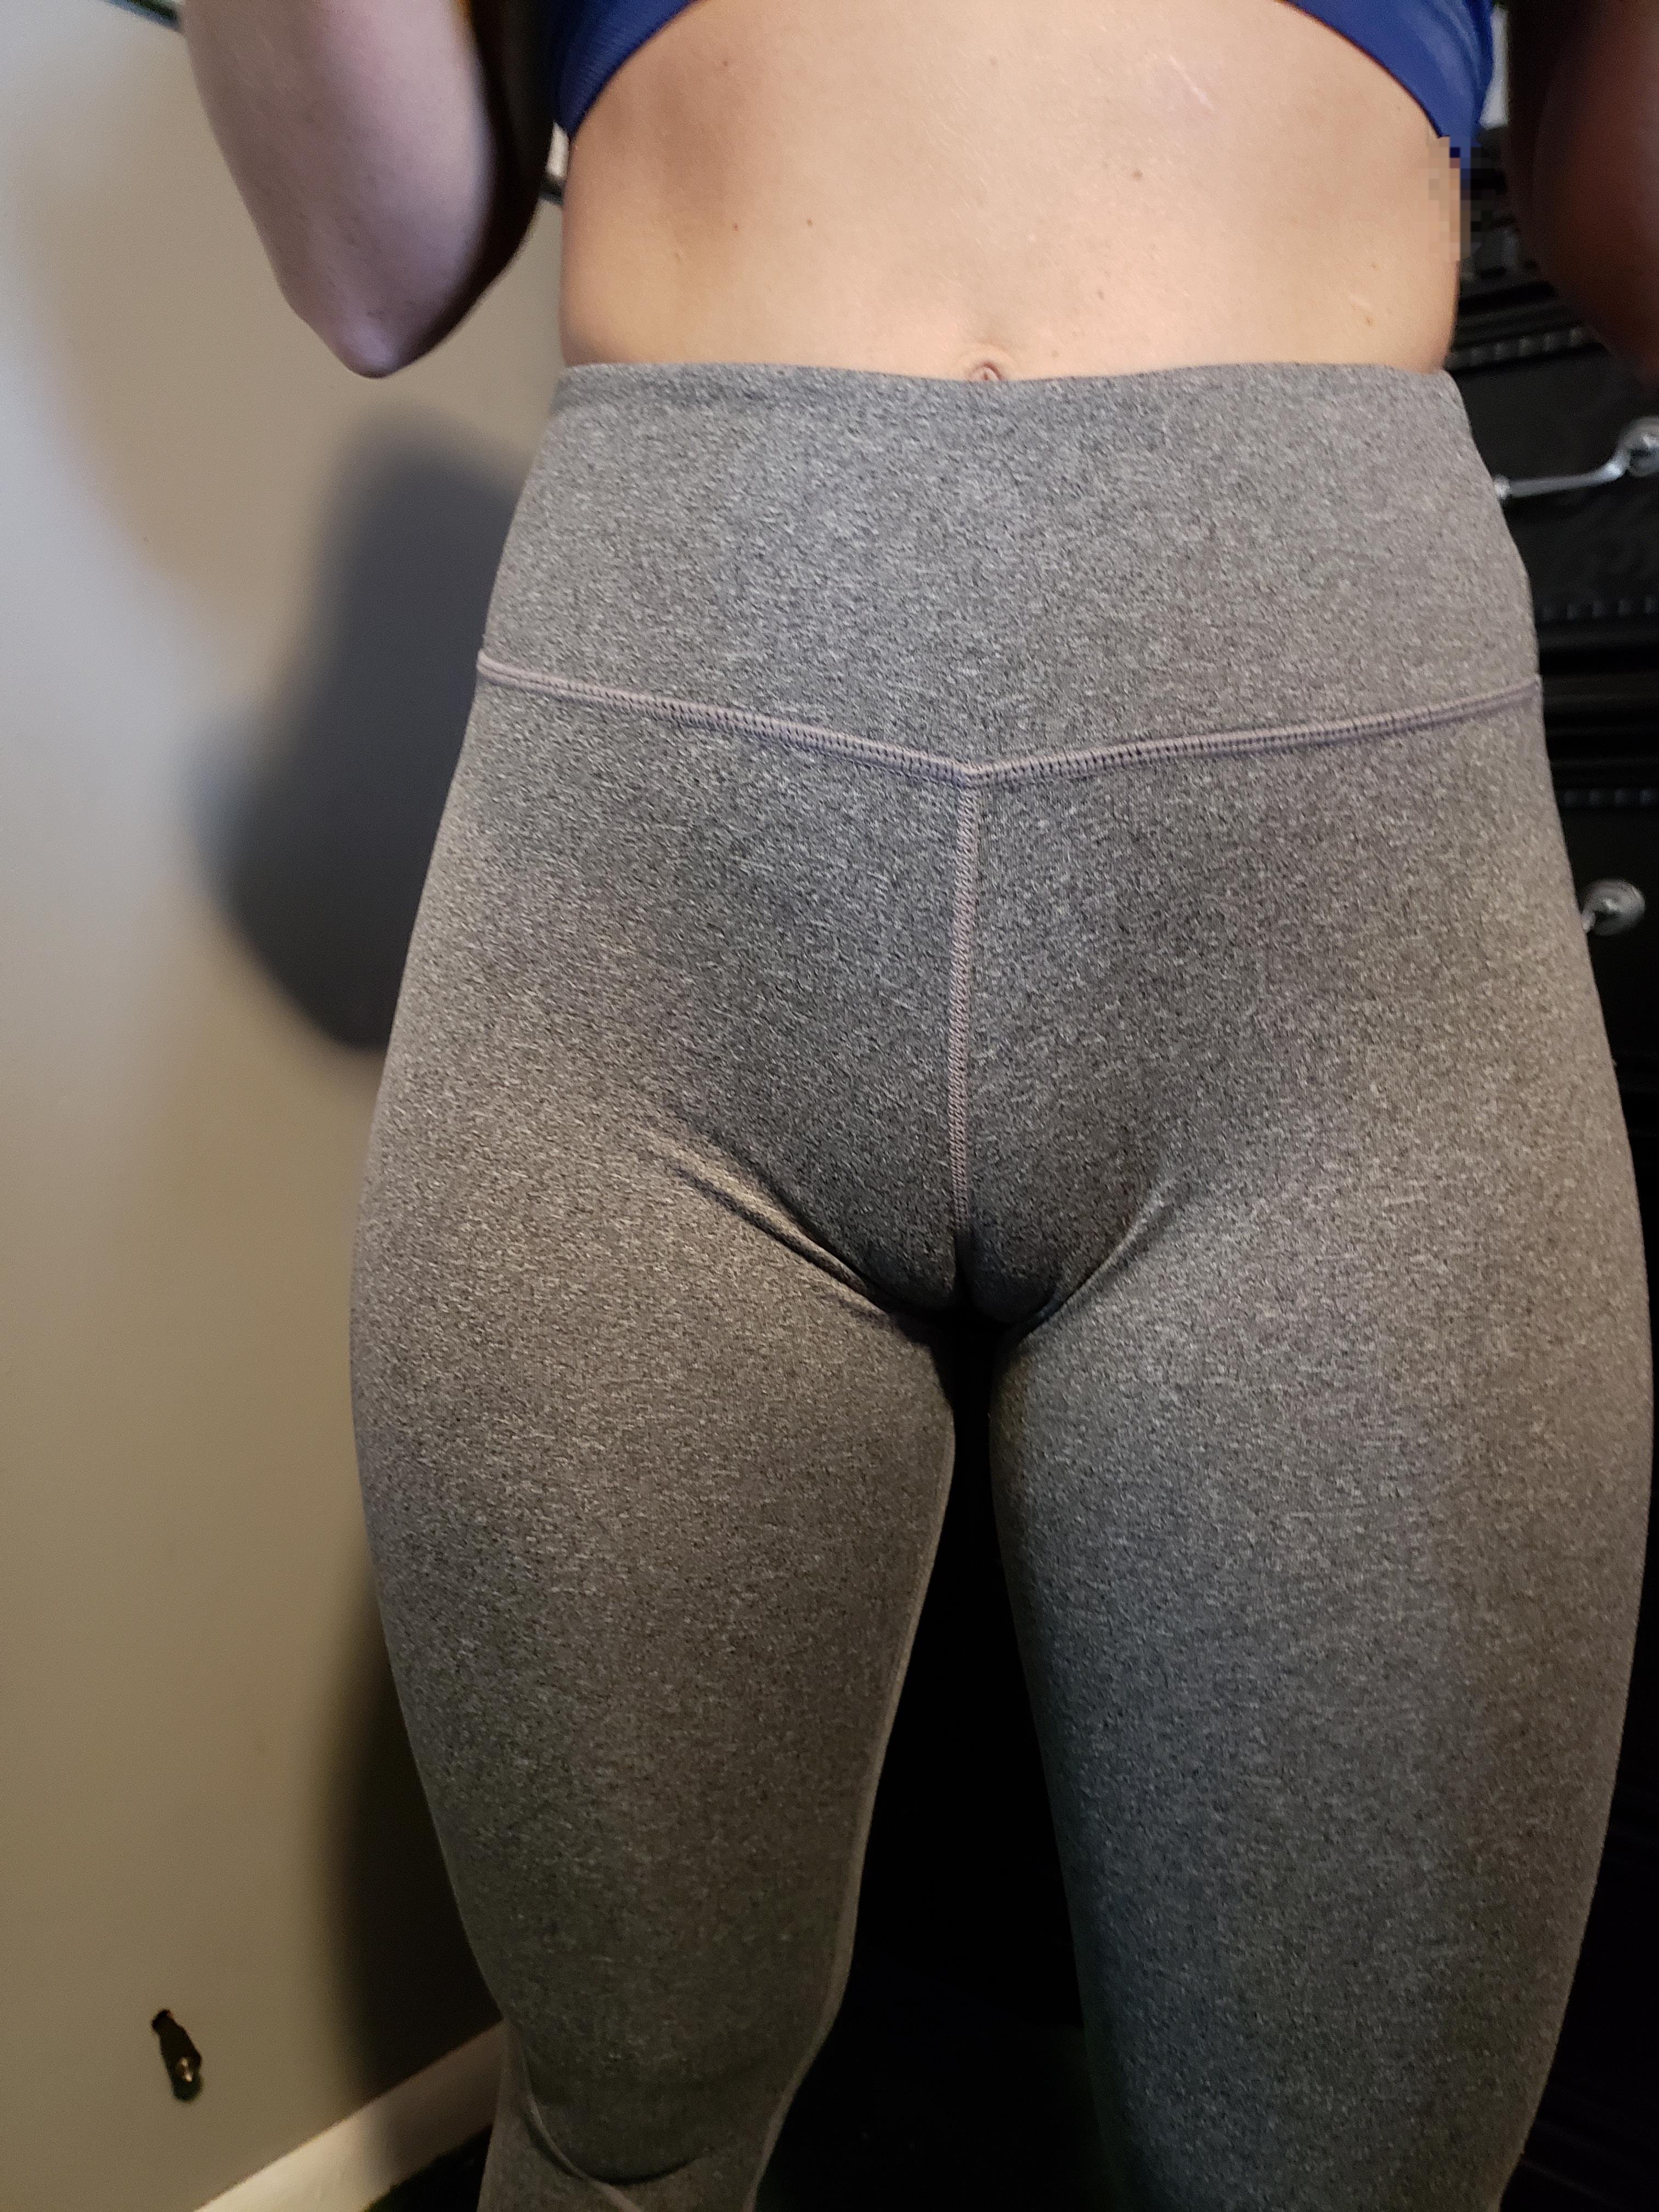 Wife's phat toe again; gym pants edition